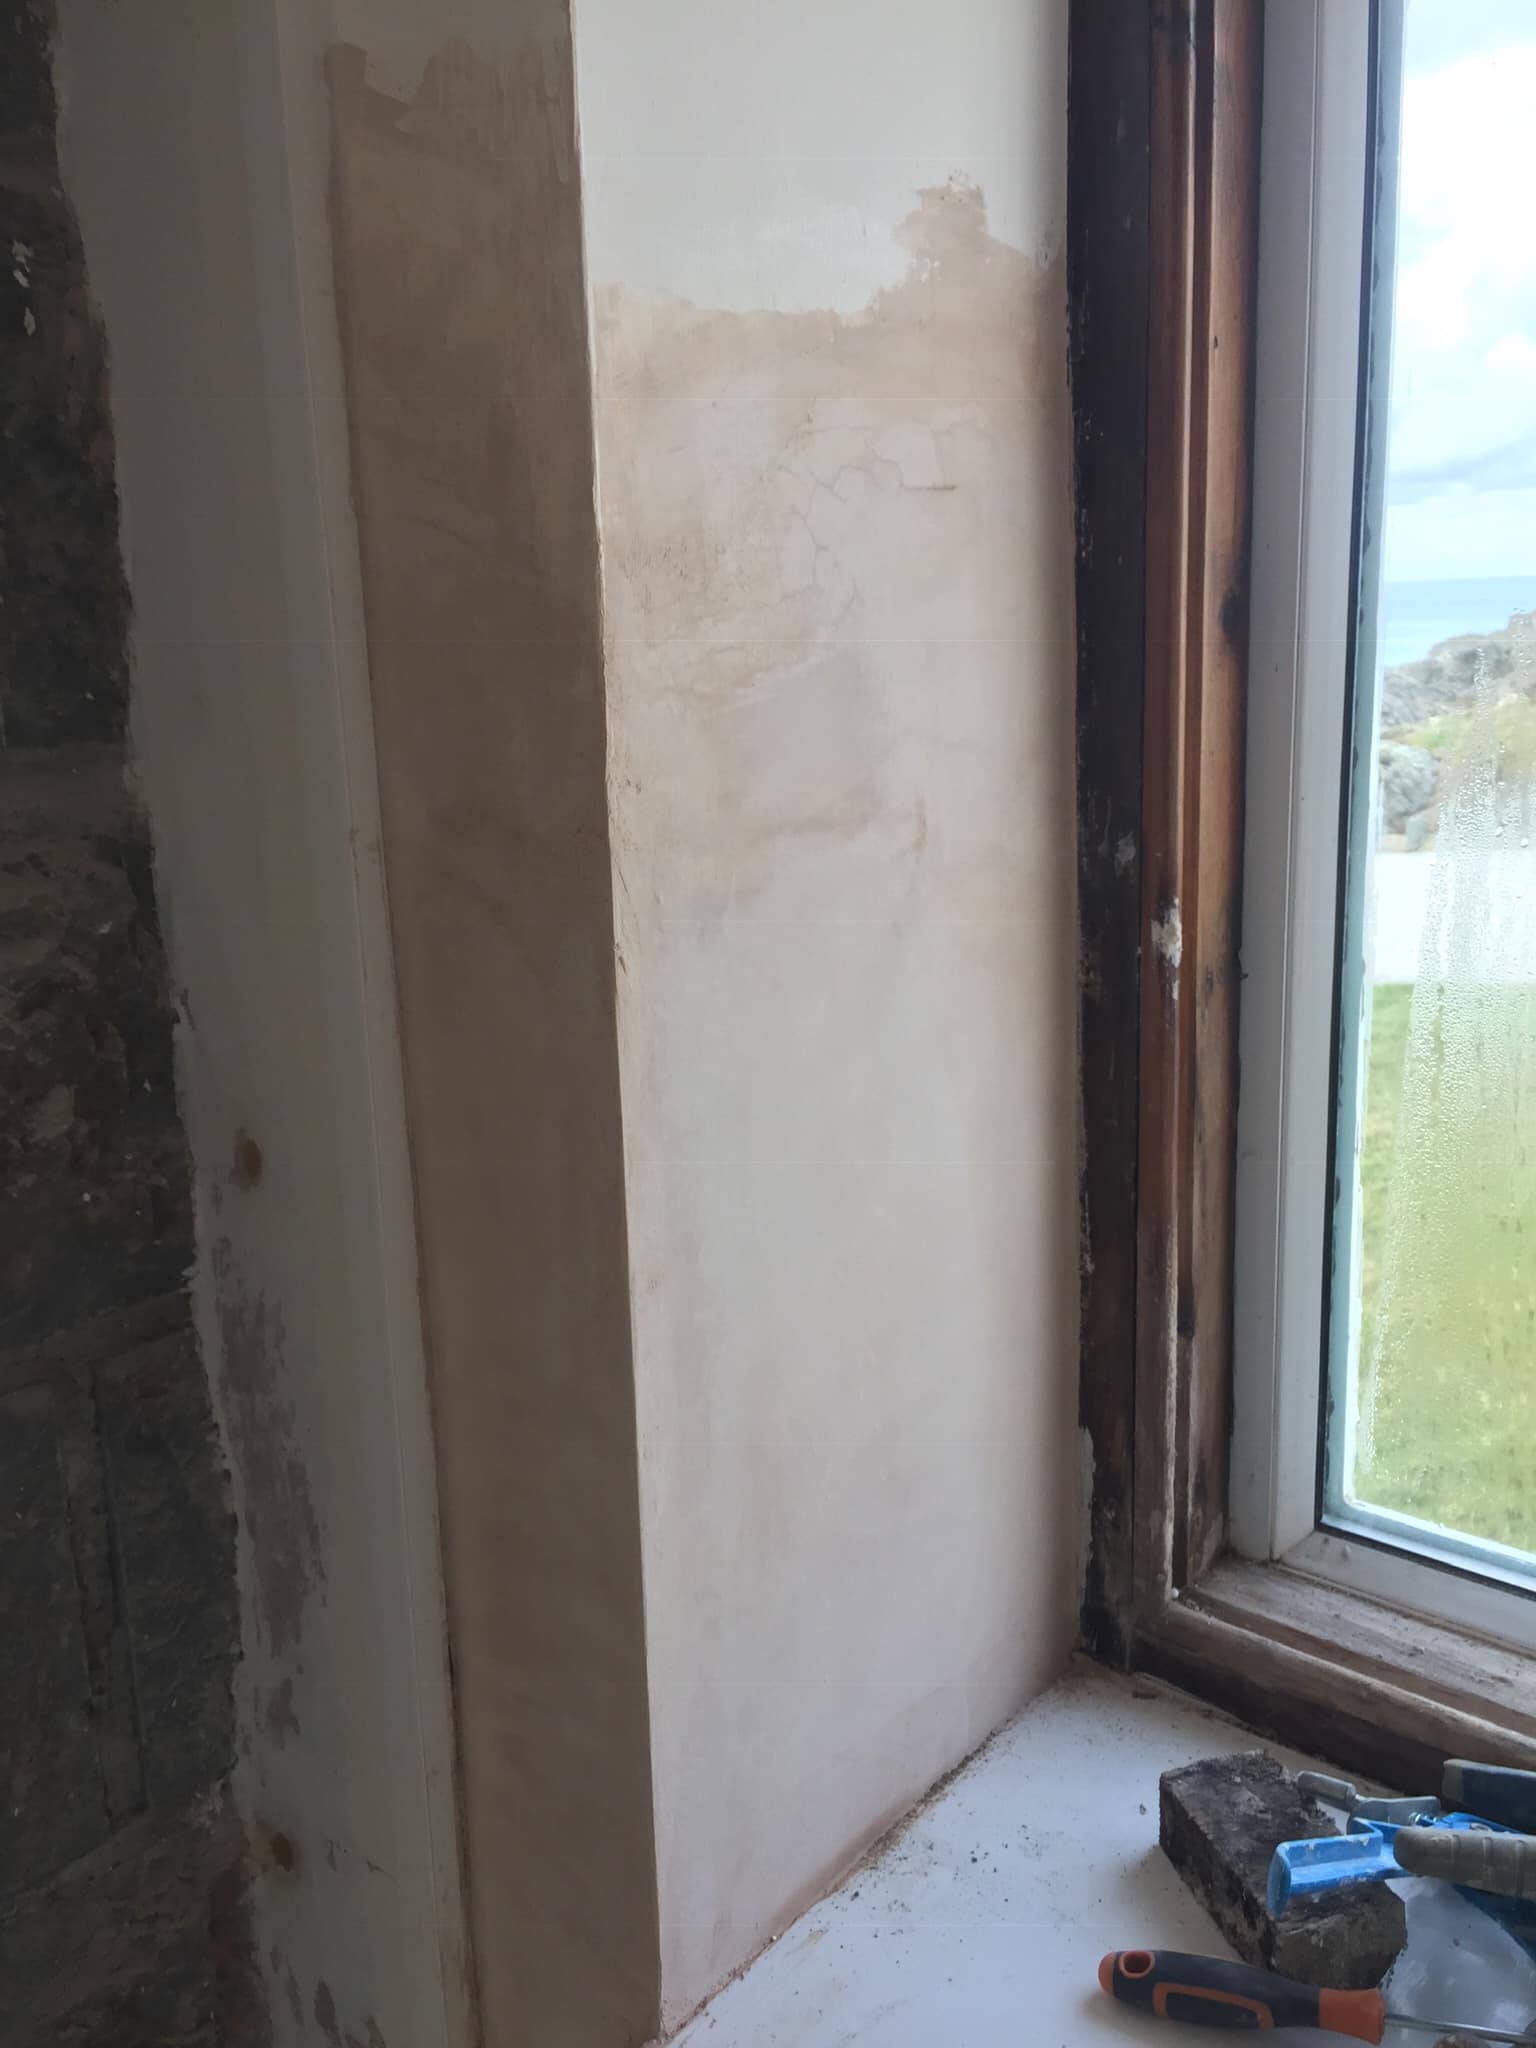 Plasterer In Pentraeth | Plastering Services | External Wall rendering | Decorative Cornice Repairs | Listed Building Renovation | Property Maintenance Services | GW Farrell Plasterers